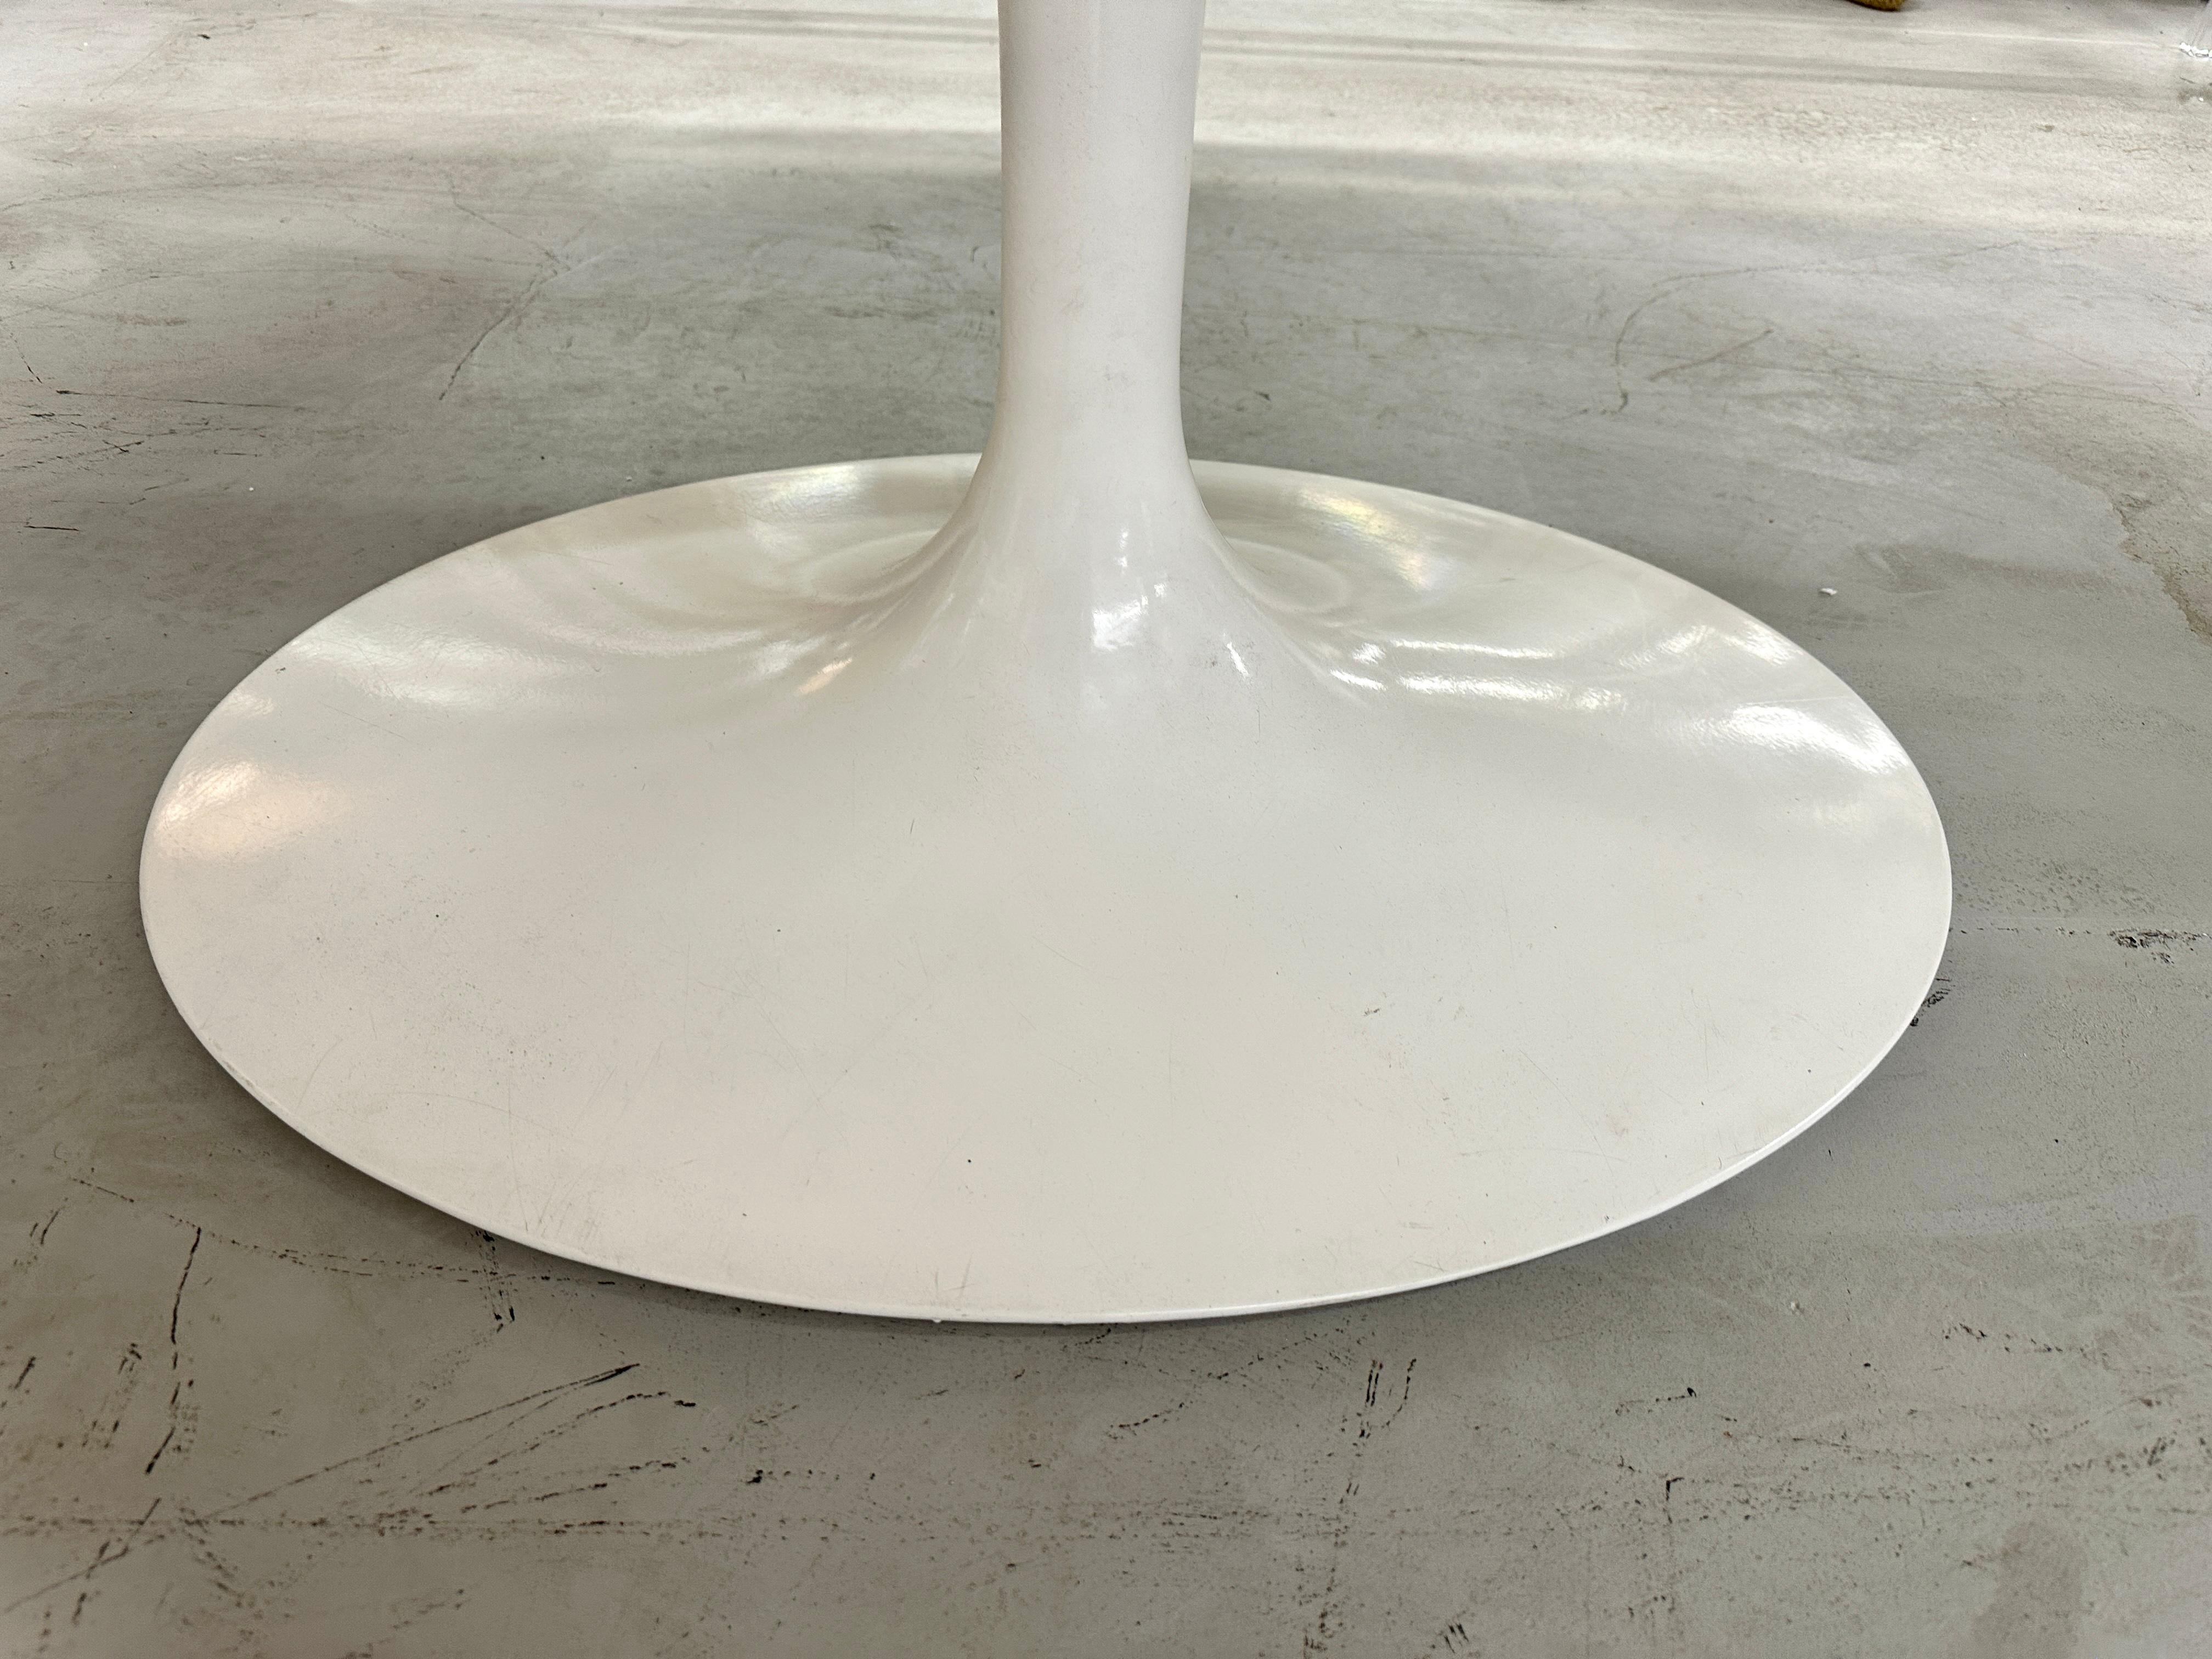 Saarinen for Knoll White Marble Oval Tulip Dining Table  For Sale 3